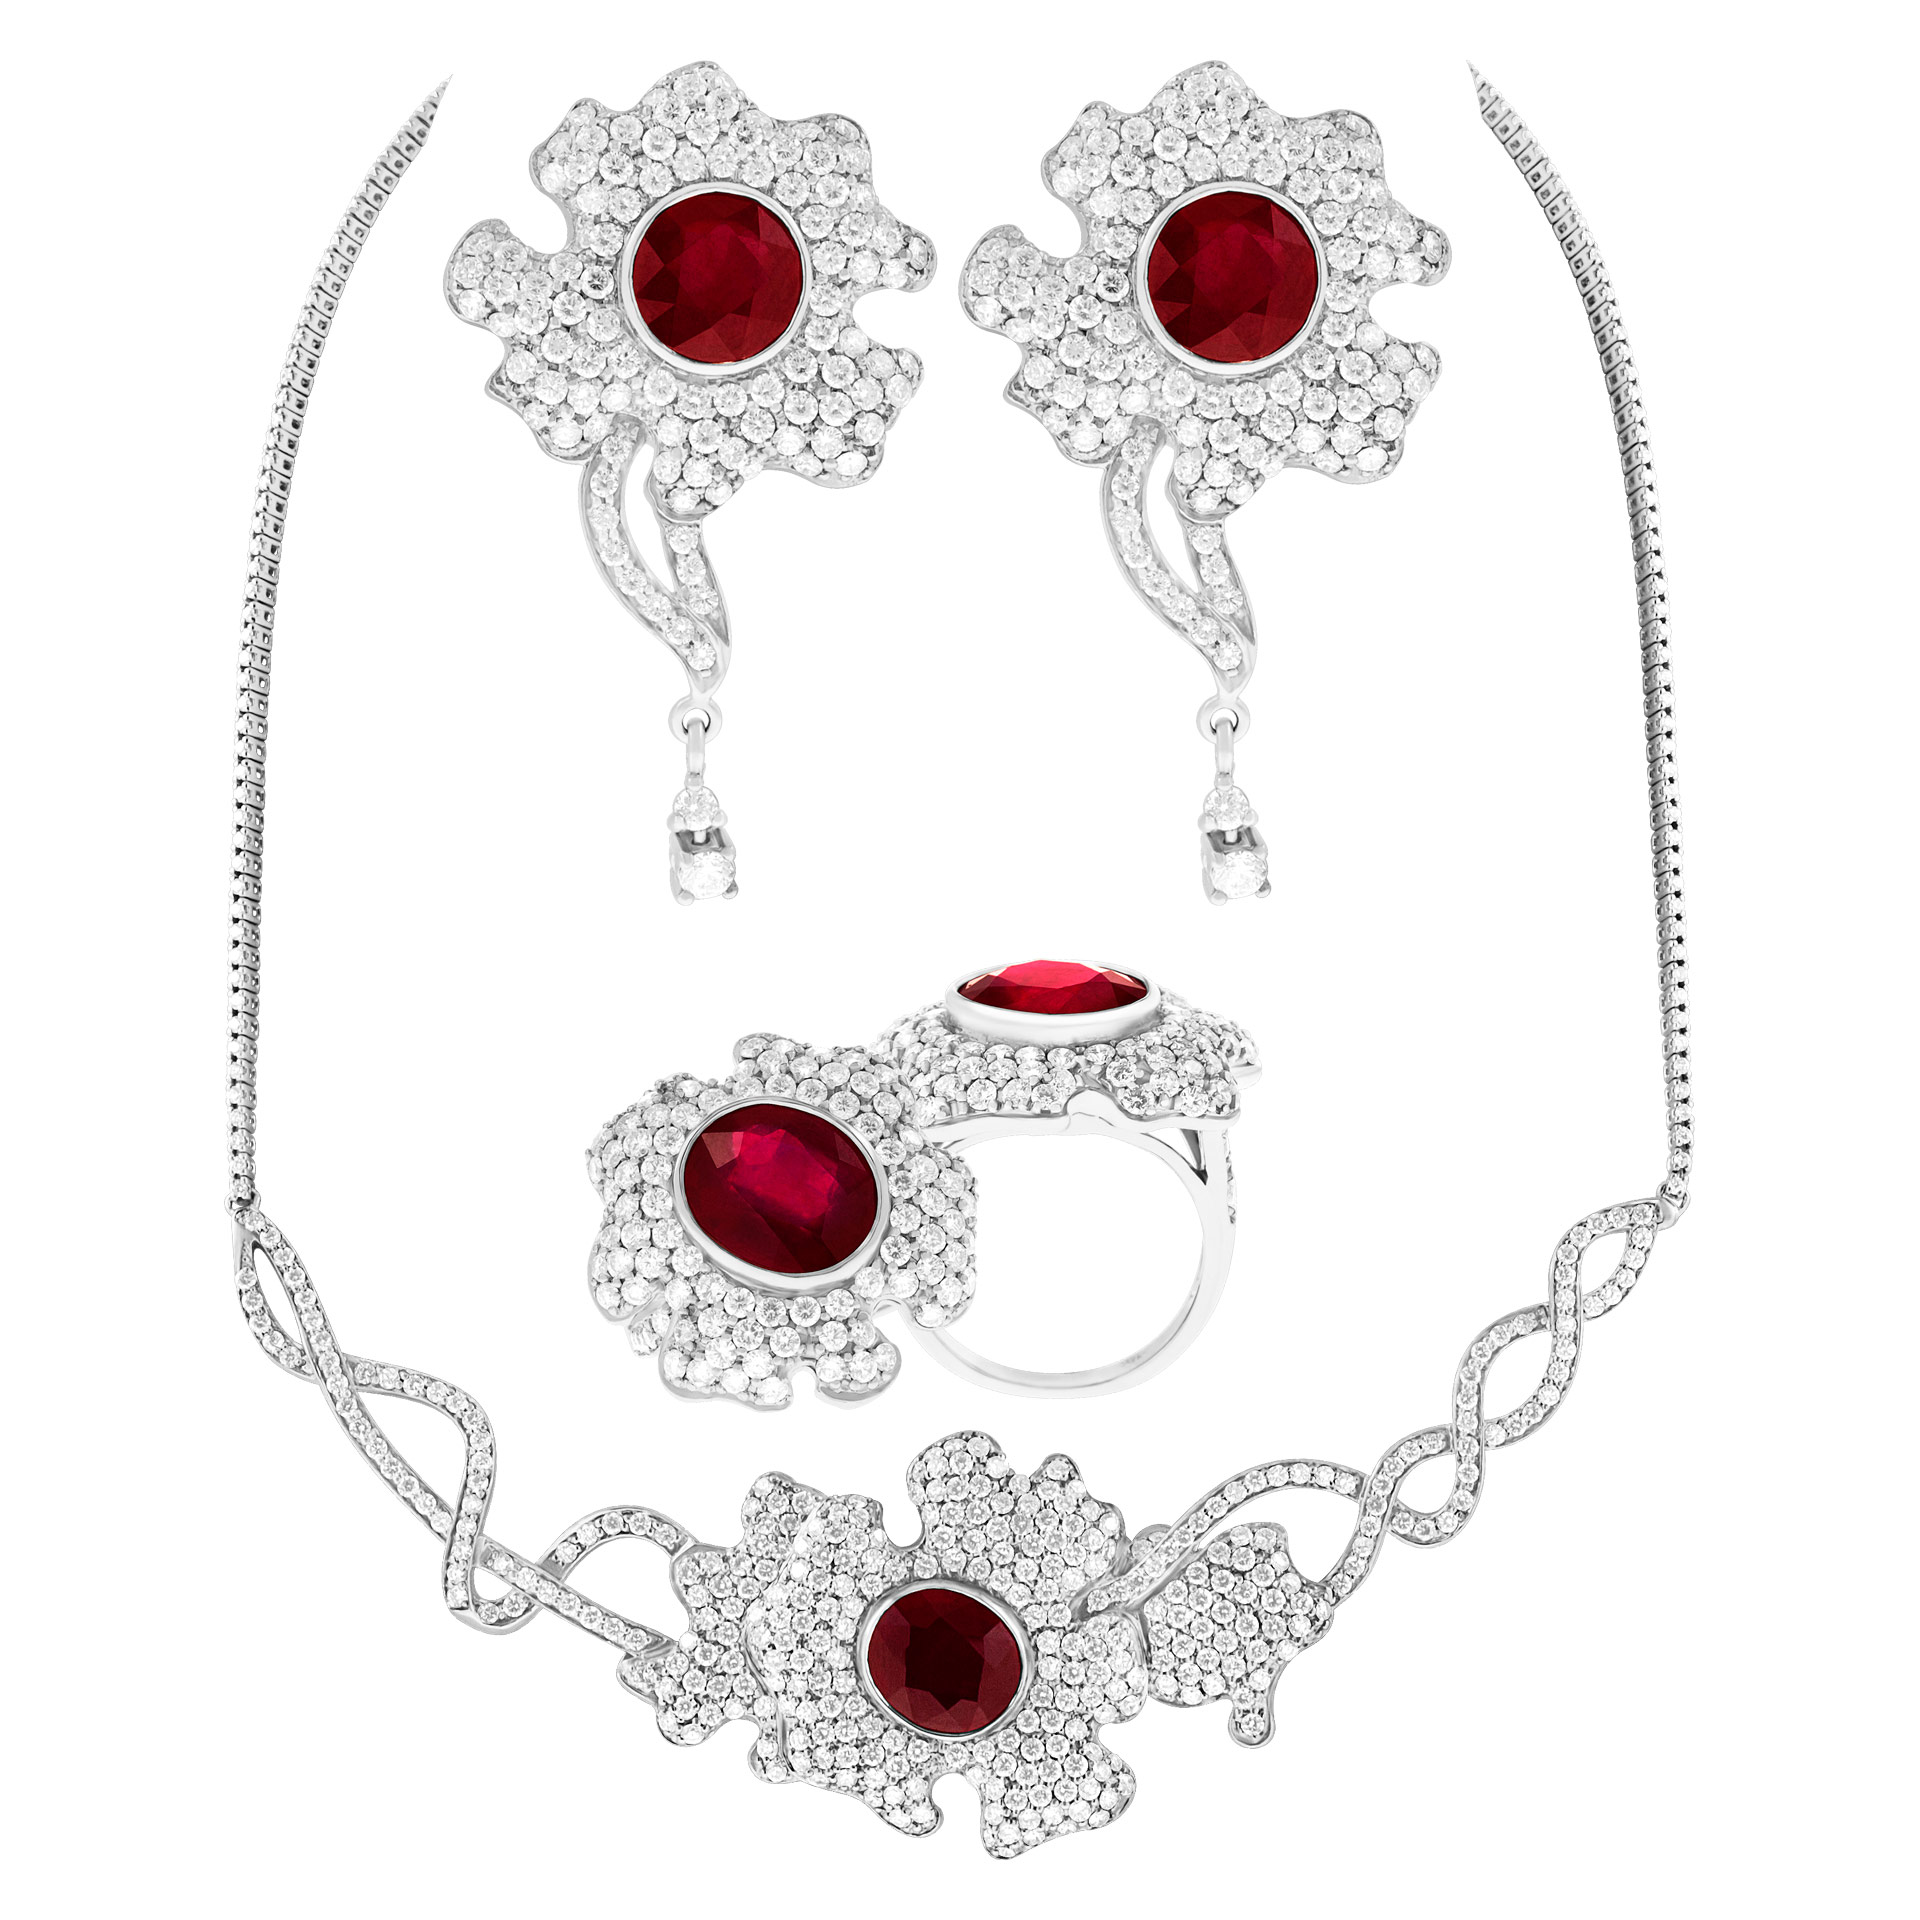 Stunning Floral Design Jewelry Set In 18k White Gold W/ Rubies & Diamonds